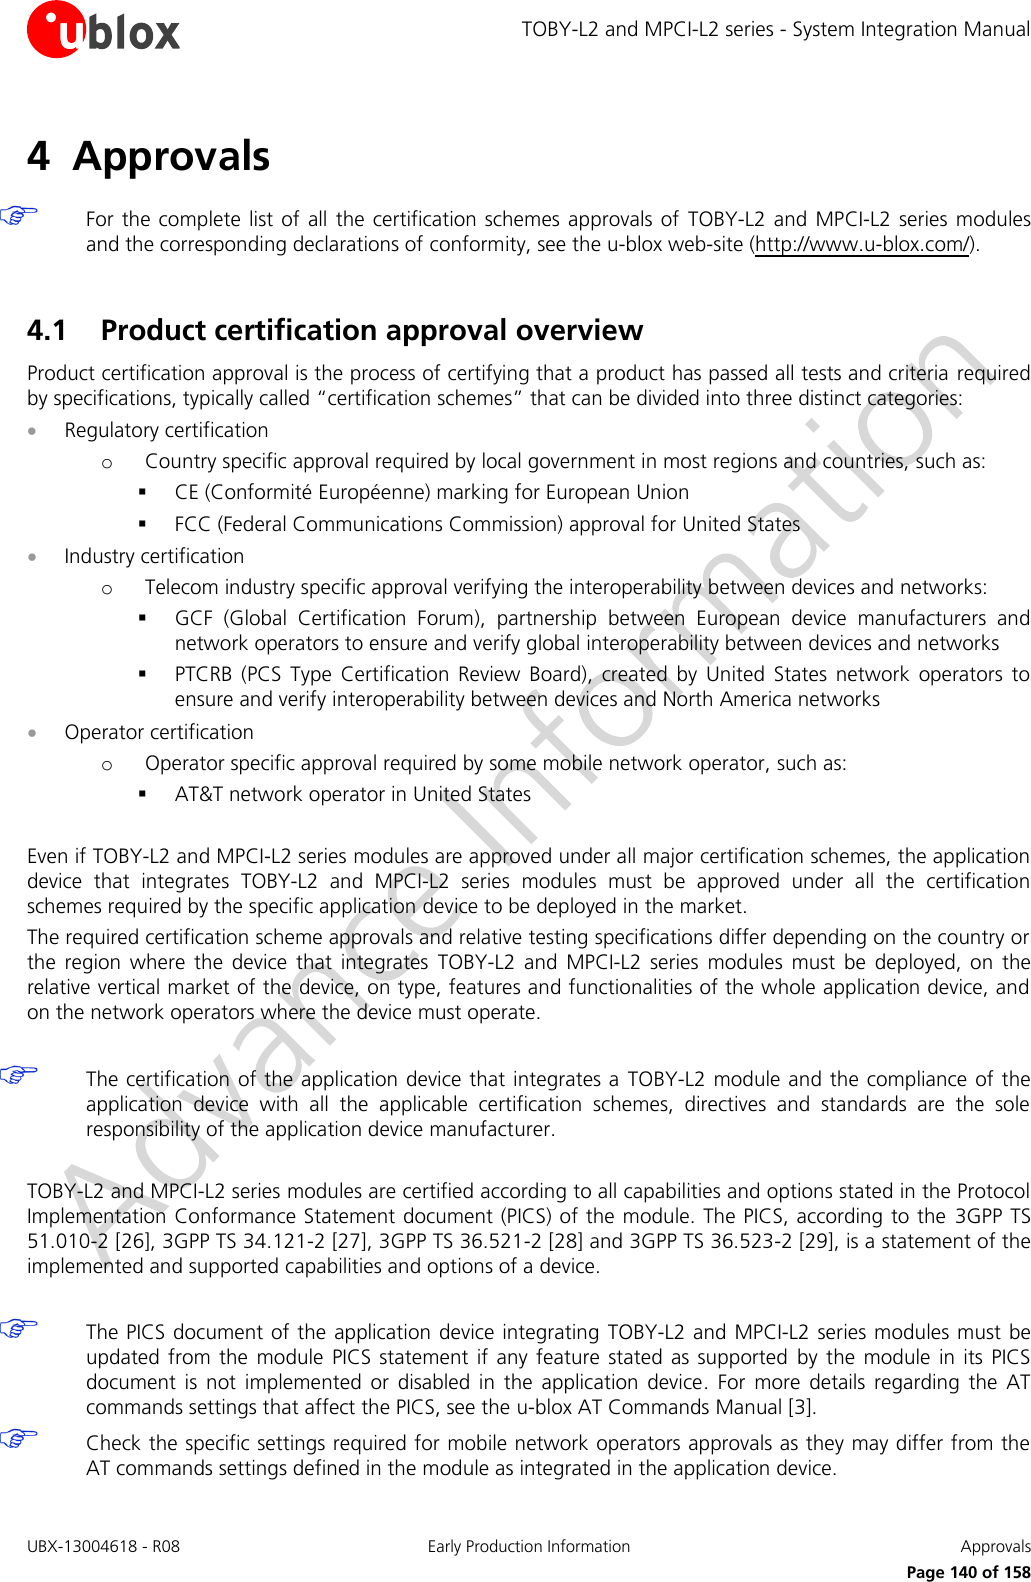 TOBY-L2 and MPCI-L2 series - System Integration Manual UBX-13004618 - R08  Early Production Information  Approvals     Page 140 of 158 4 Approvals   For the complete  list of  all  the  certification schemes approvals  of  TOBY-L2 and MPCI-L2 series  modules and the corresponding declarations of conformity, see the u-blox web-site (http://www.u-blox.com/).  4.1 Product certification approval overview Product certification approval is the process of certifying that a product has passed all tests and criteria  required by specifications, typically called “certification schemes” that can be divided into three distinct categories:  Regulatory certification o Country specific approval required by local government in most regions and countries, such as:  CE (Conformité Européenne) marking for European Union  FCC (Federal Communications Commission) approval for United States  Industry certification o Telecom industry specific approval verifying the interoperability between devices and networks:  GCF  (Global  Certification  Forum),  partnership  between  European  device  manufacturers  and network operators to ensure and verify global interoperability between devices and networks  PTCRB  (PCS  Type  Certification  Review  Board),  created  by  United  States  network  operators  to ensure and verify interoperability between devices and North America networks  Operator certification o Operator specific approval required by some mobile network operator, such as:  AT&amp;T network operator in United States  Even if TOBY-L2 and MPCI-L2 series modules are approved under all major certification schemes, the application device  that  integrates  TOBY-L2  and  MPCI-L2  series  modules  must  be  approved  under  all  the  certification schemes required by the specific application device to be deployed in the market. The required certification scheme approvals and relative testing specifications differ depending on the country or the  region  where  the  device  that  integrates  TOBY-L2  and  MPCI-L2  series  modules  must  be  deployed,  on  the relative vertical market of the device, on type, features and functionalities of the whole application device, and on the network operators where the device must operate.   The certification of the application device that integrates a  TOBY-L2  module and the compliance of the application  device  with  all  the  applicable  certification  schemes,  directives  and  standards  are  the  sole responsibility of the application device manufacturer.  TOBY-L2 and MPCI-L2 series modules are certified according to all capabilities and options stated in the Protocol Implementation Conformance Statement document (PICS) of the module. The PICS, according to the  3GPP TS 51.010-2 [26], 3GPP TS 34.121-2 [27], 3GPP TS 36.521-2 [28] and 3GPP TS 36.523-2 [29], is a statement of the implemented and supported capabilities and options of a device.   The PICS document of the application device integrating  TOBY-L2 and MPCI-L2 series modules must  be updated  from  the  module  PICS  statement  if  any  feature  stated  as  supported  by  the  module  in  its  PICS document  is  not  implemented  or  disabled  in  the  application  device.  For  more  details  regarding  the  AT commands settings that affect the PICS, see the u-blox AT Commands Manual [3].  Check the specific settings required for mobile network operators approvals as they may differ from the AT commands settings defined in the module as integrated in the application device.  